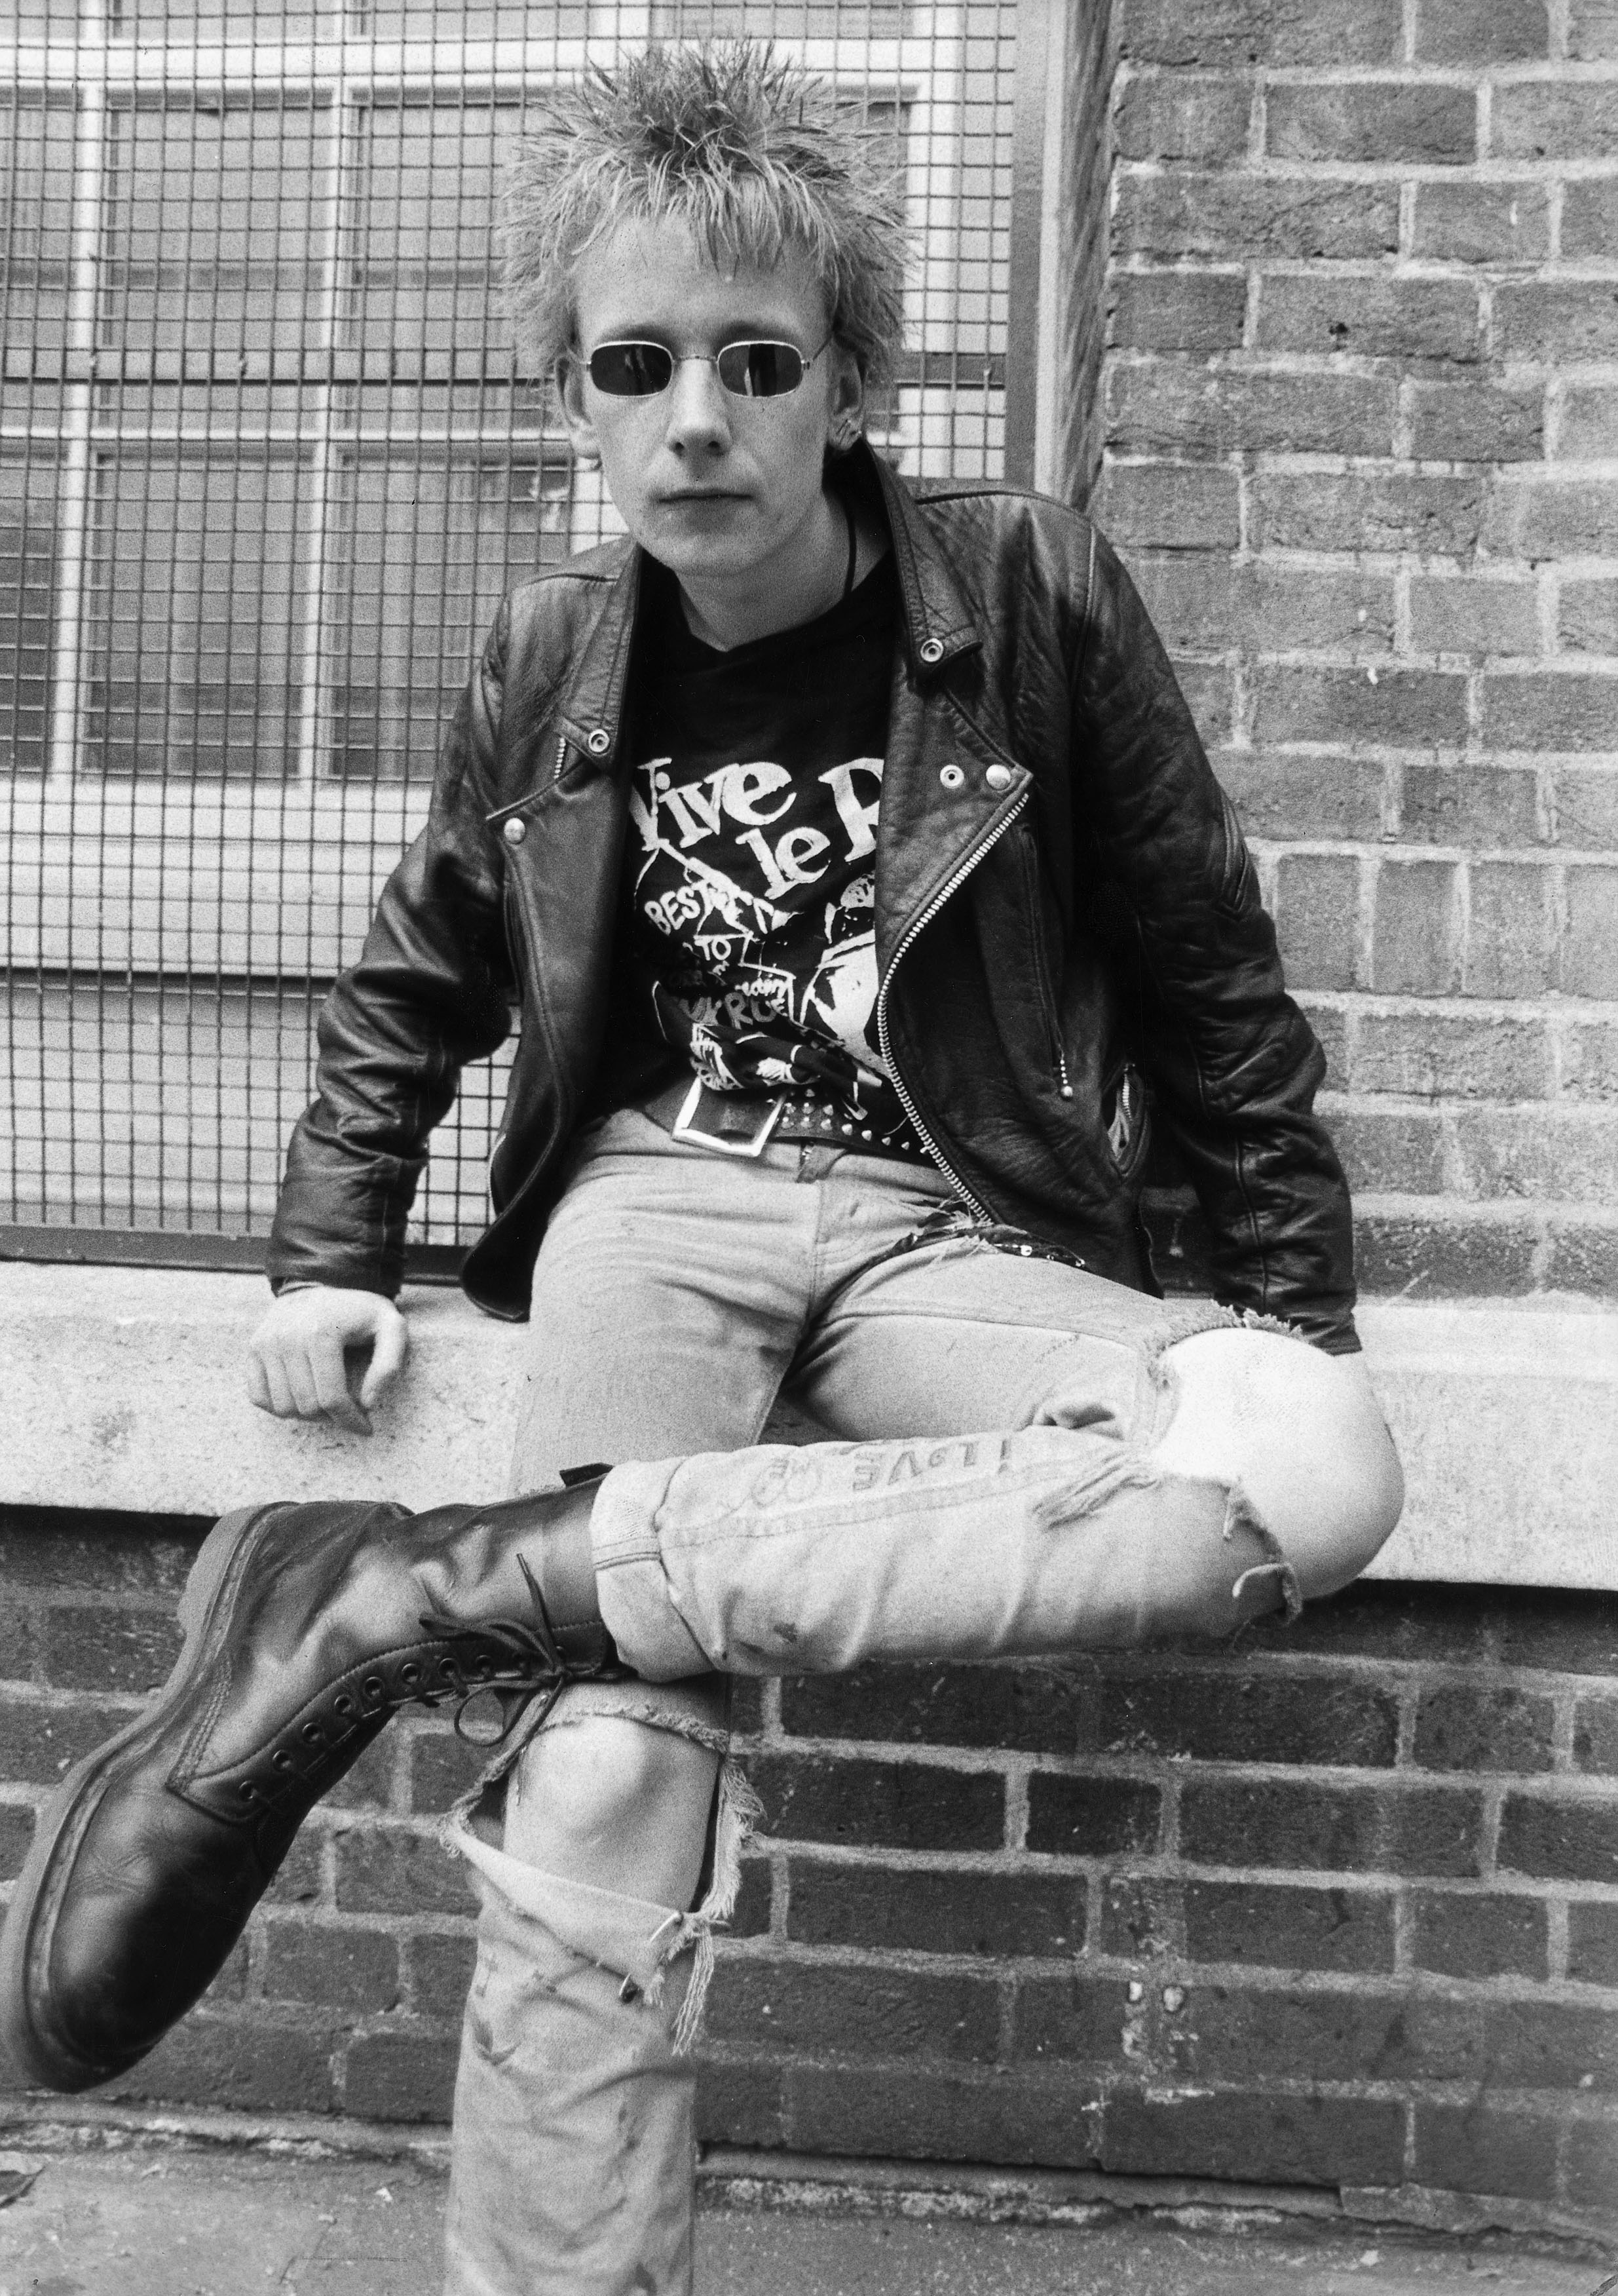 A young man wears typical punk dress: a leather jacket, torn jeans, Doc Martens boots, and a safety-pin earring, 1985.